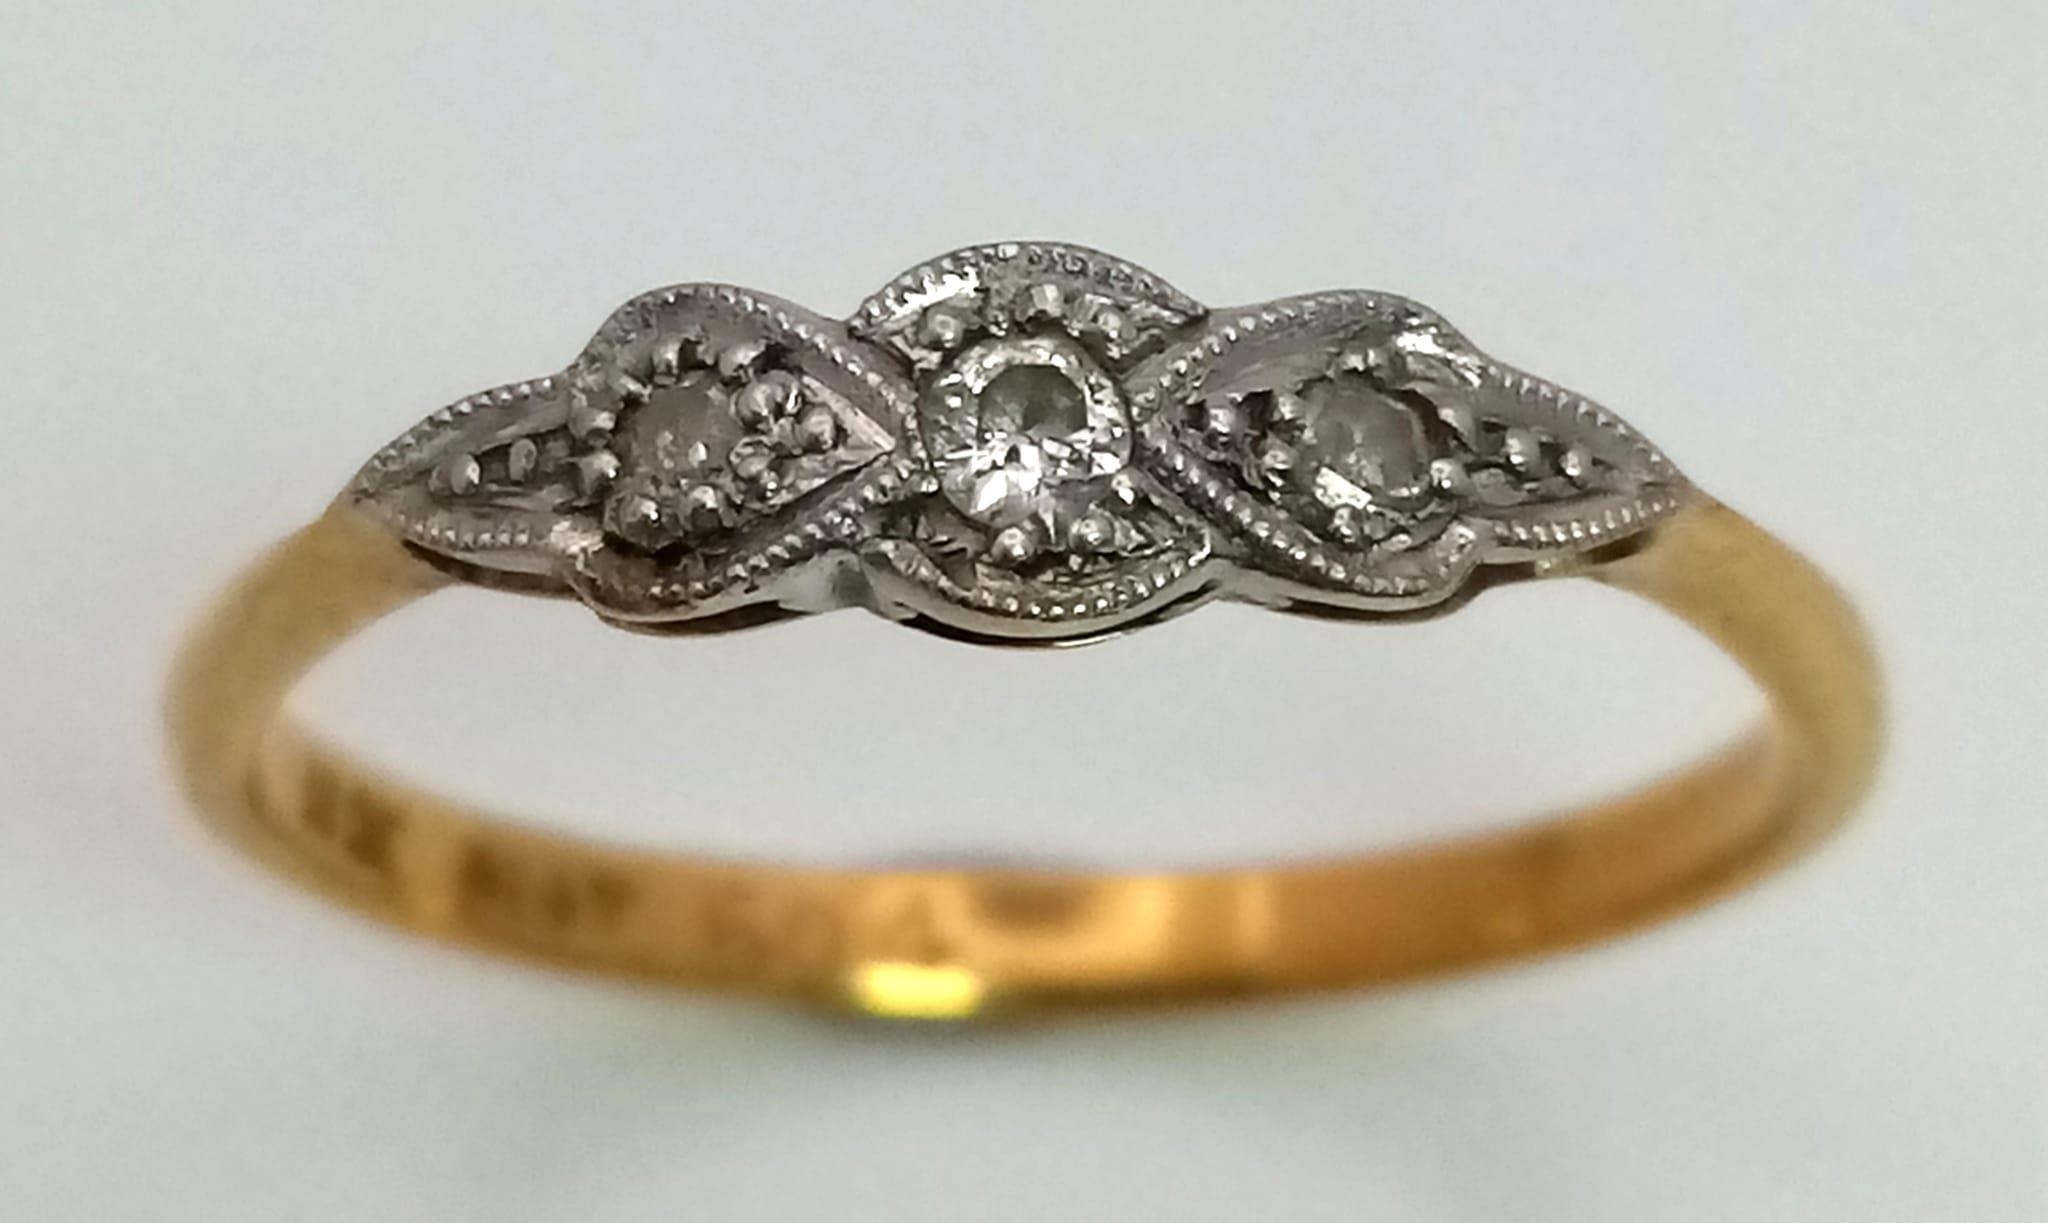 An 18 K yellow gold and platinum ring with a trilogy of diamonds. Ring size: N, weight: 1.7 g. - Image 2 of 7